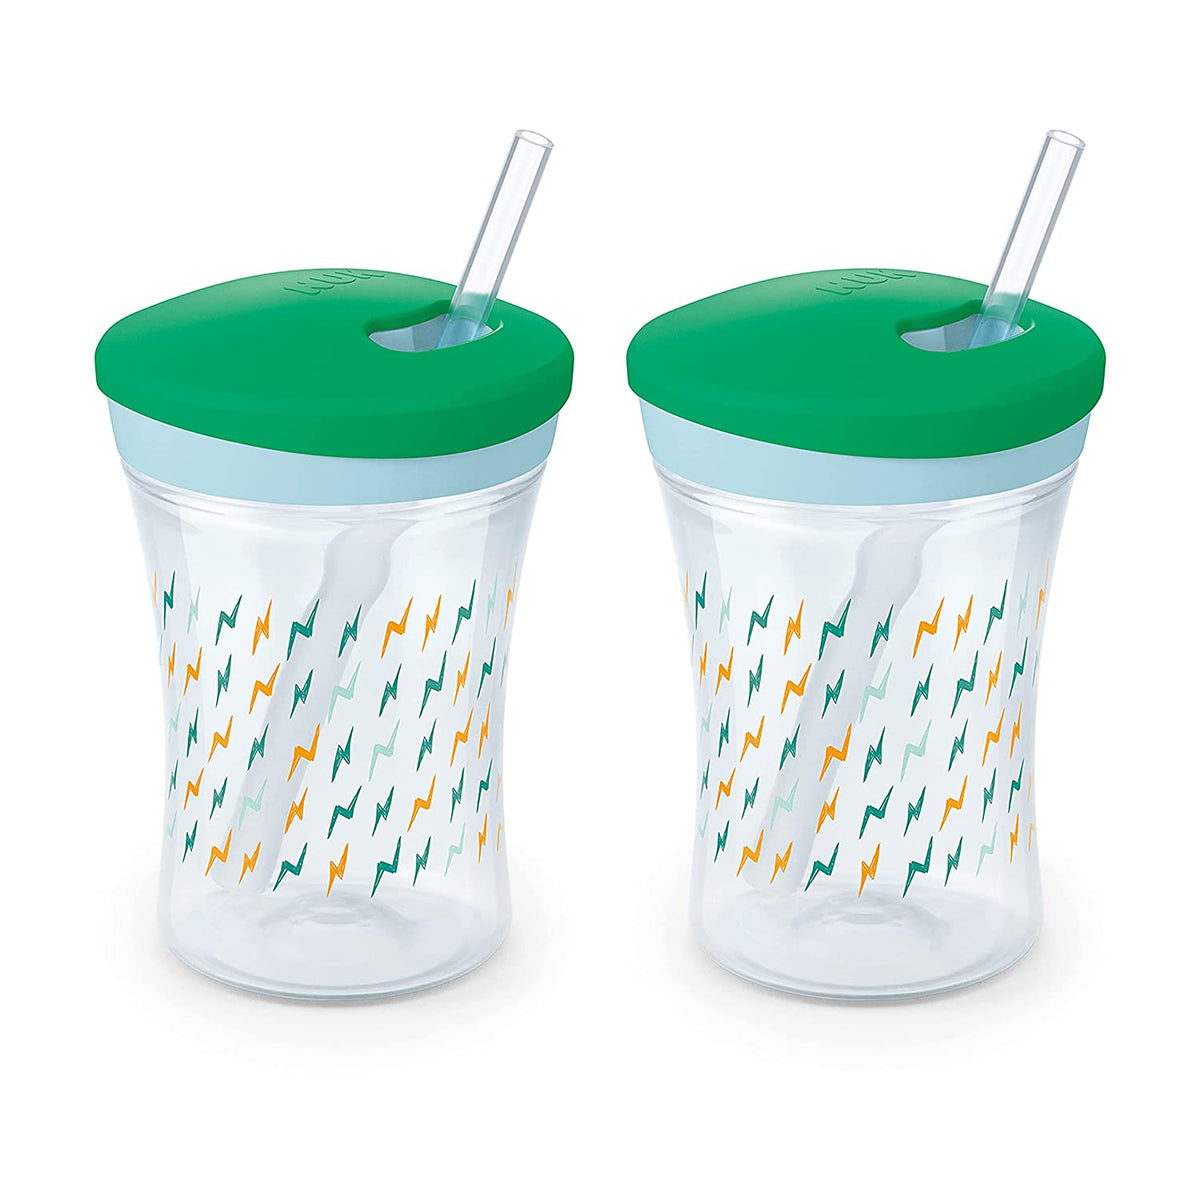 Replacement Straws with Valves - 2 pack (Munchkin)